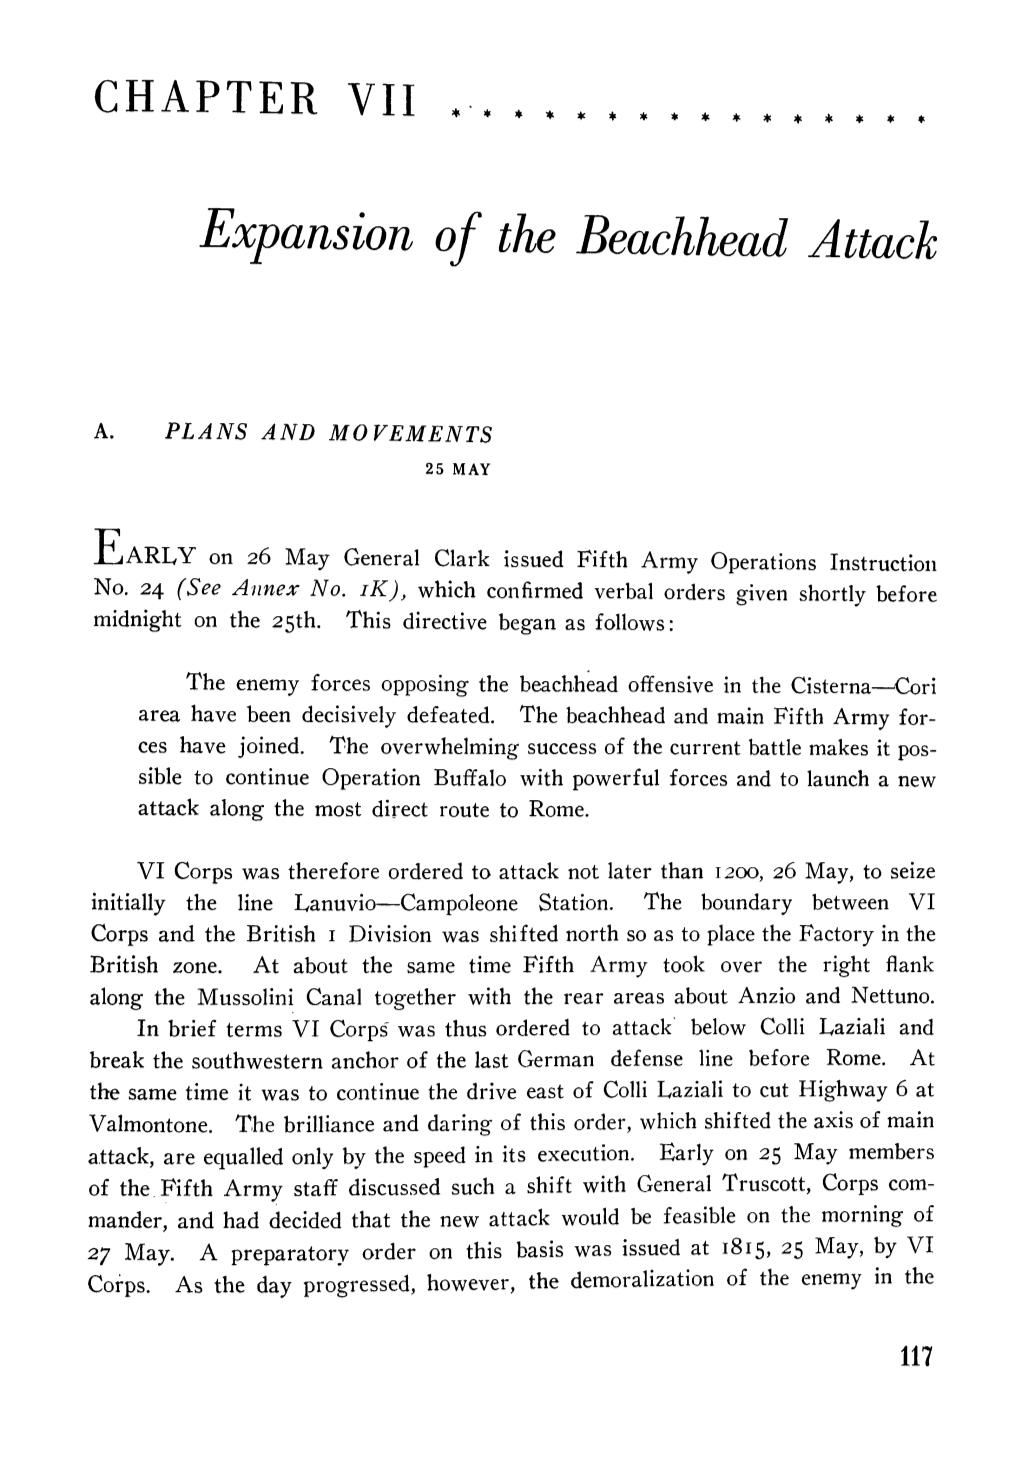 Expansion of the Beachhead Attack